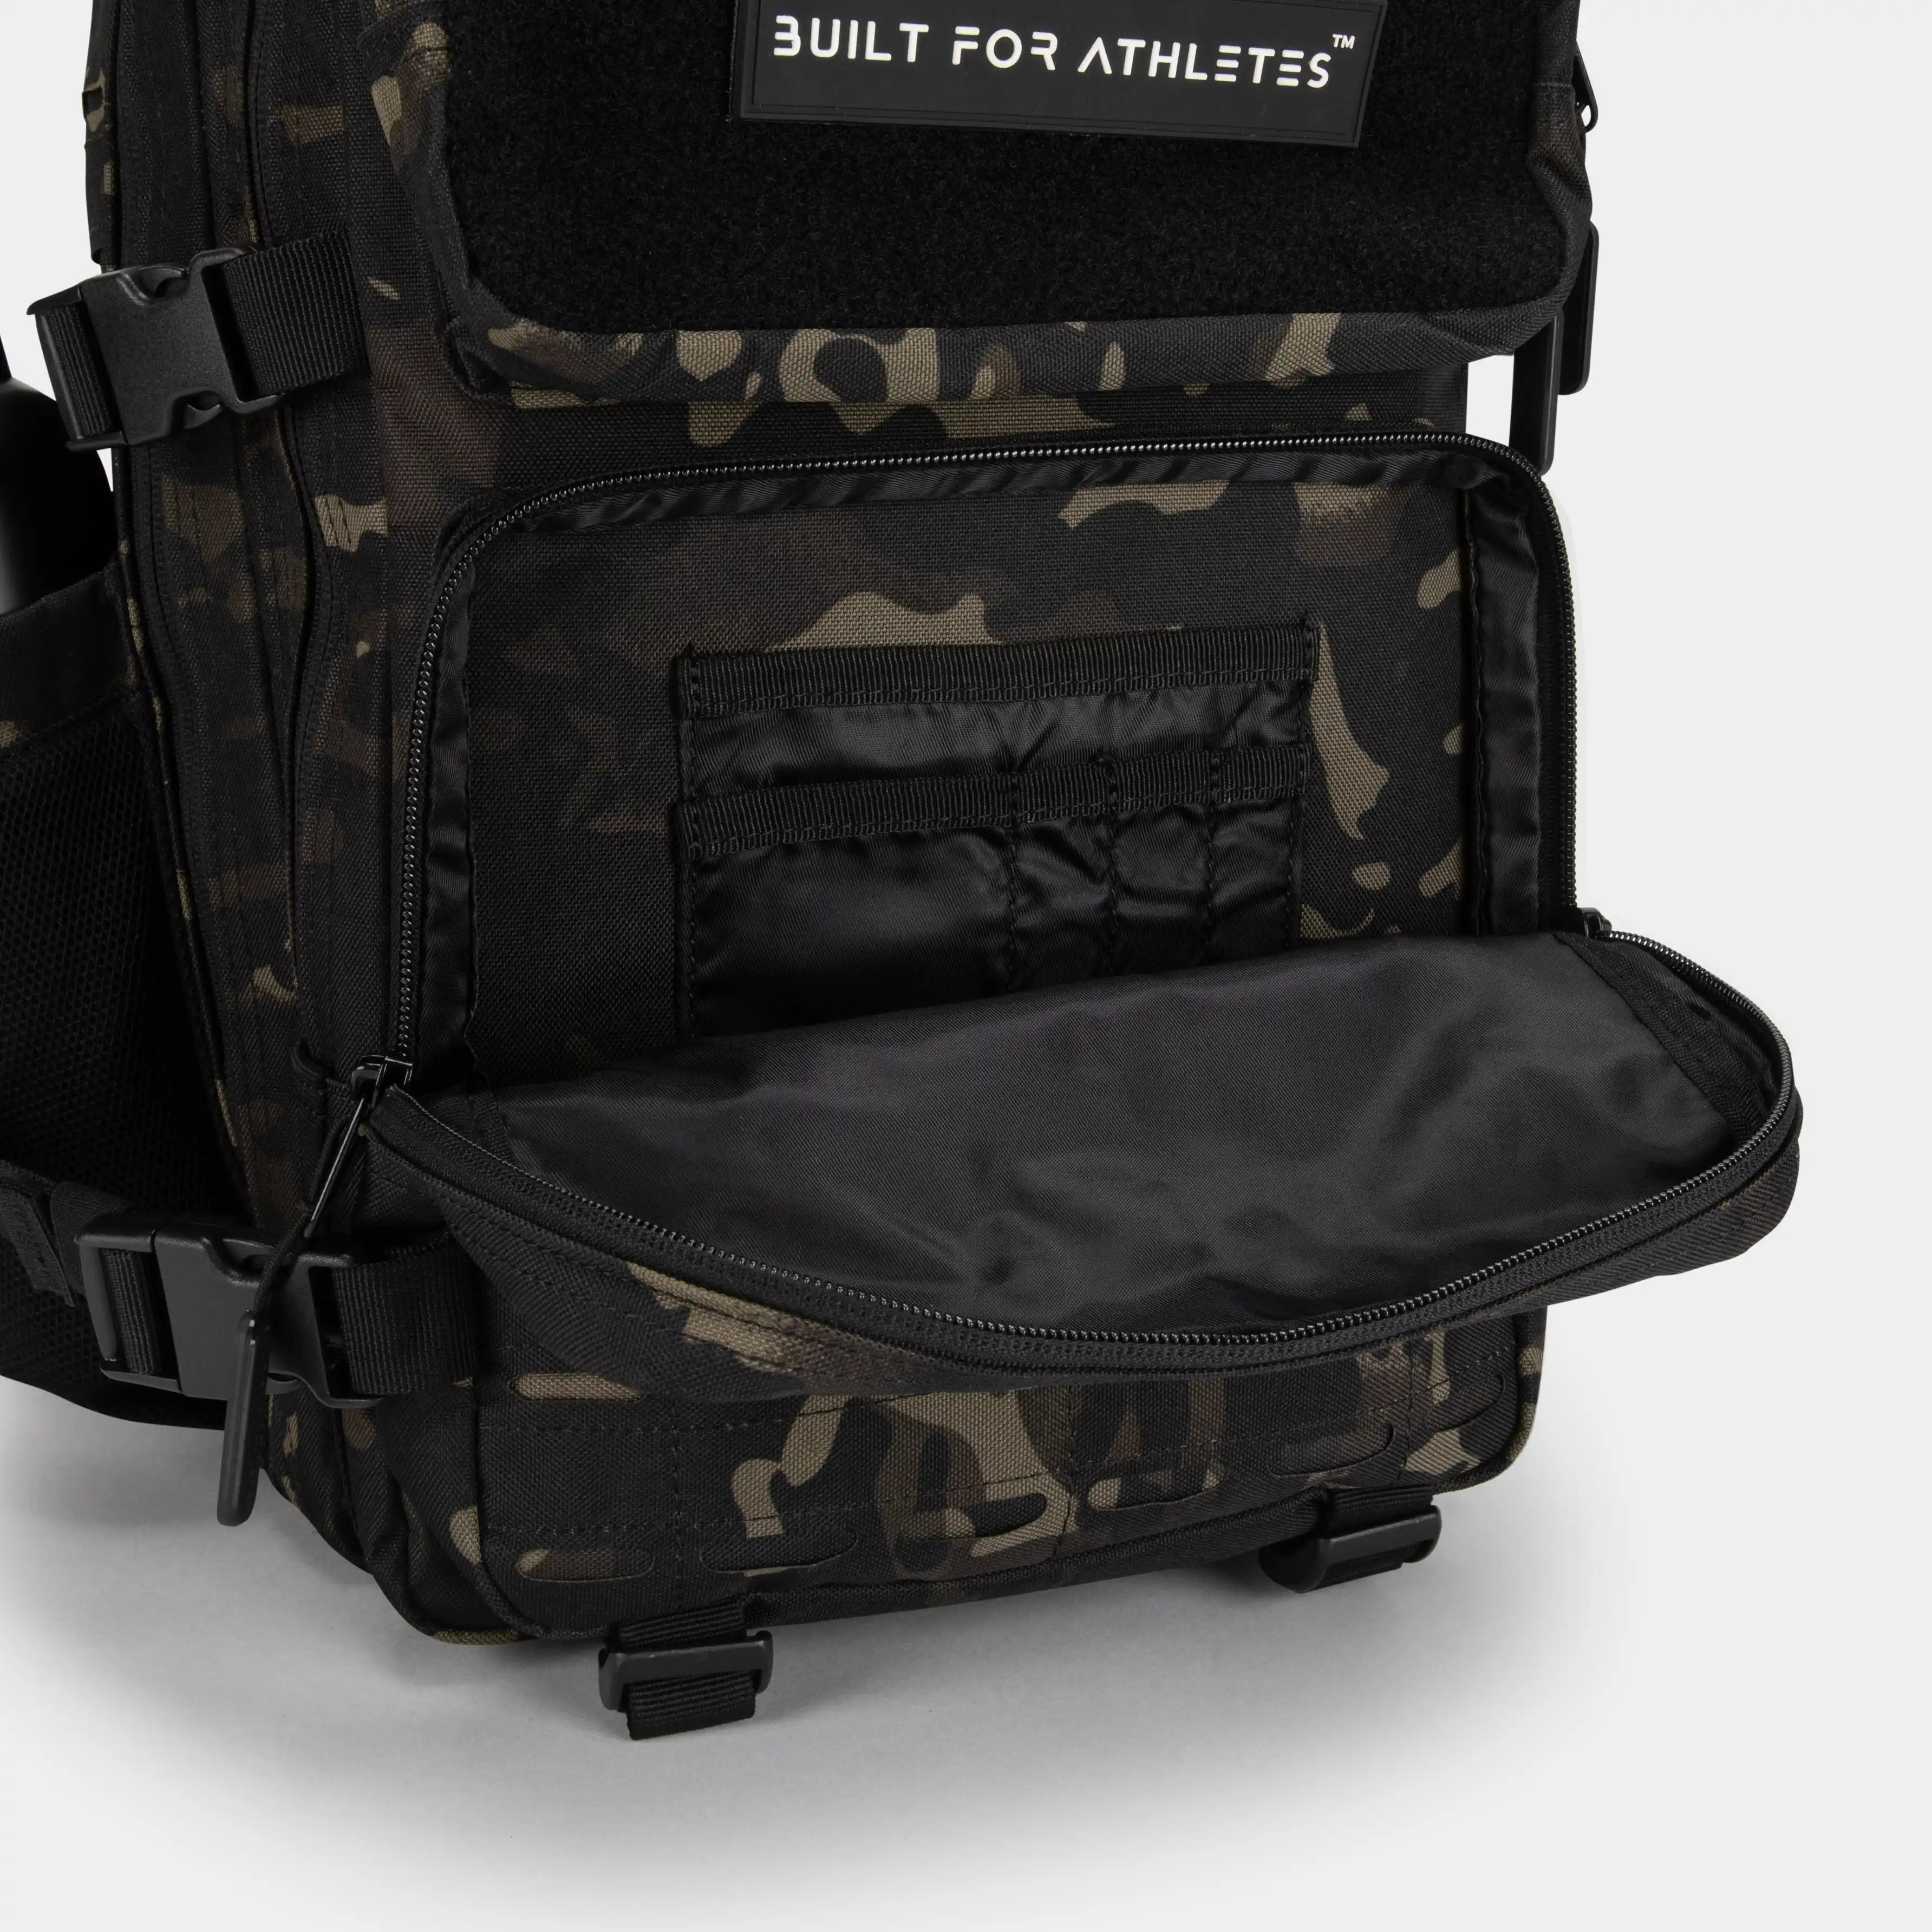 Built for Athletes Backpacks Small Black Camo Gym Backpack